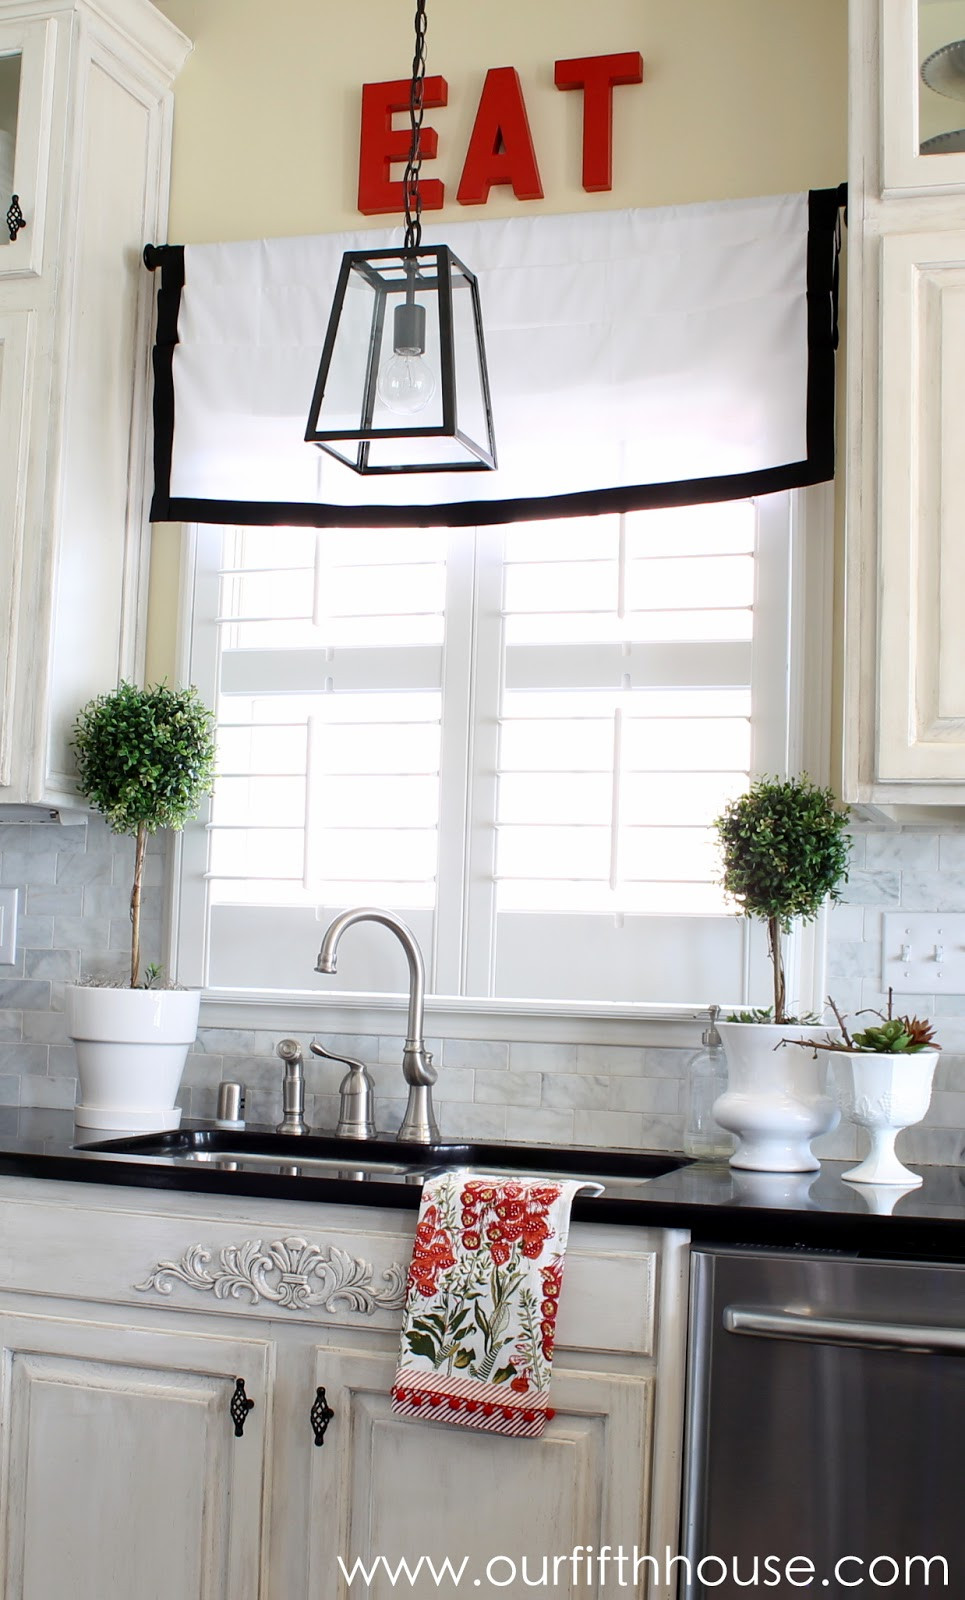 Lantern Pendant Light For Kitchen
 New Kitchen Lighting A Lantern Over the Sink Our Fifth